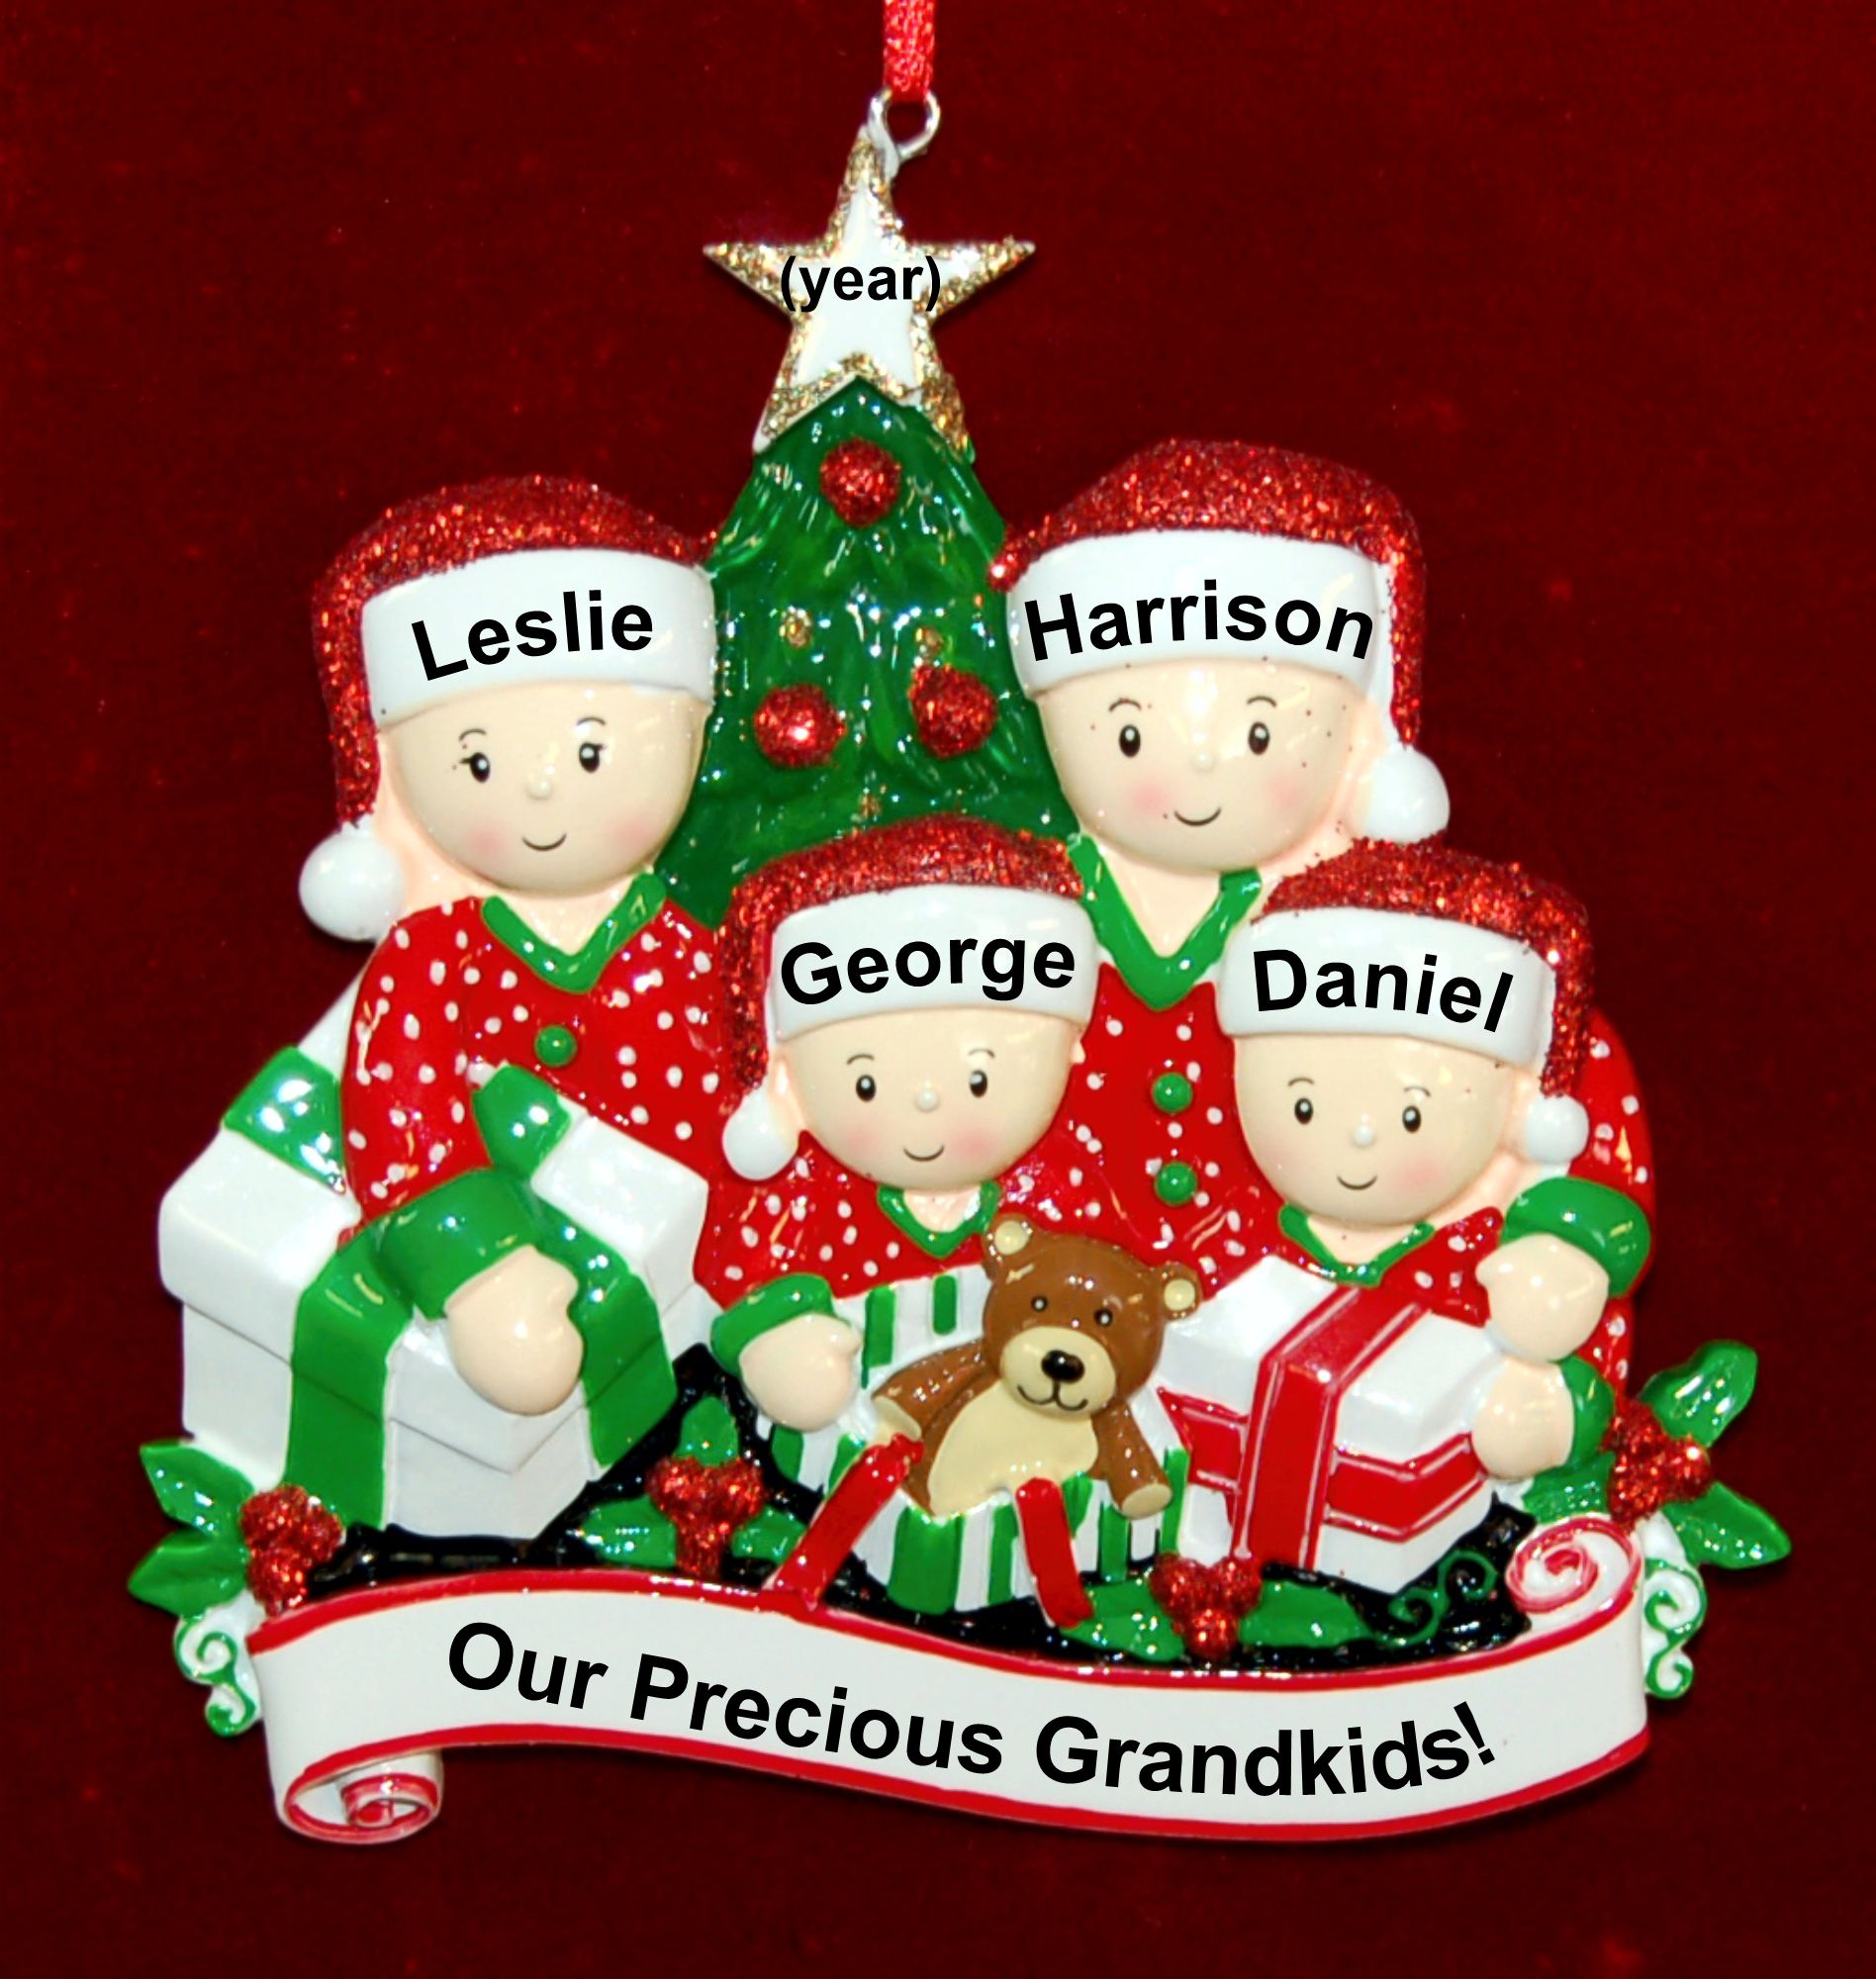 Personalized 4 Grandkids Christmas Ornament Gifts Under the Tree Personalized by Russell Rhodes